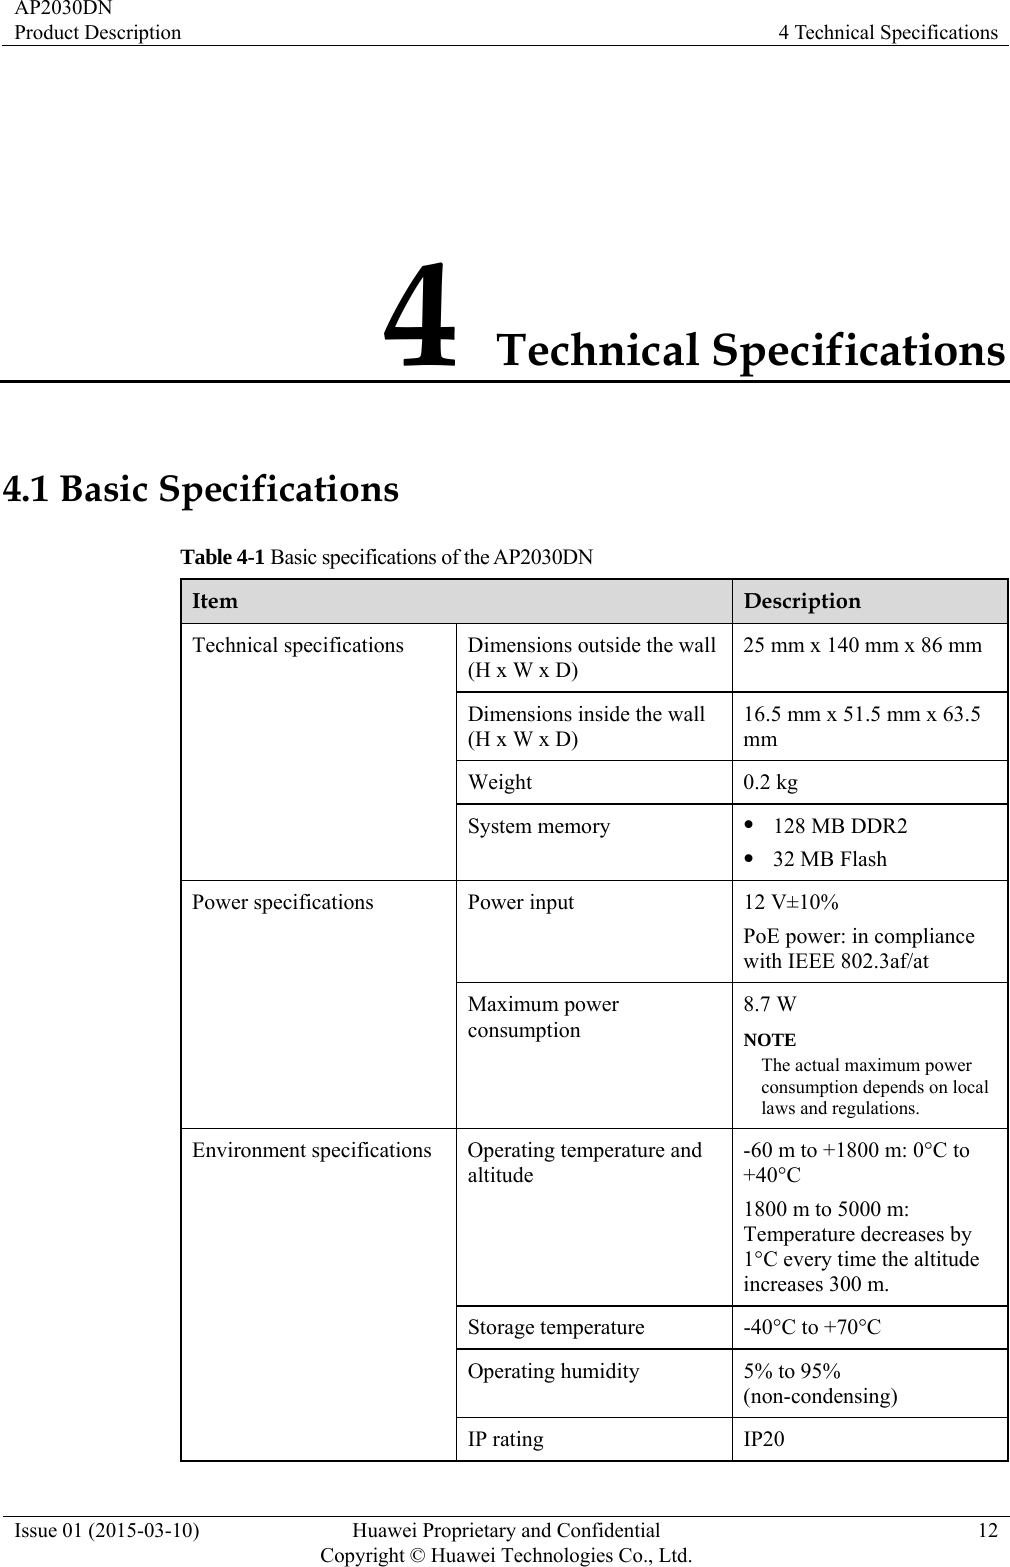 AP2030DN Product Description  4 Technical Specifications Issue 01 (2015-03-10)  Huawei Proprietary and Confidential         Copyright © Huawei Technologies Co., Ltd.12 4 Technical Specifications 4.1 Basic Specifications Table 4-1 Basic specifications of the AP2030DN Item  Description Technical specifications  Dimensions outside the wall (H x W x D) 25 mm x 140 mm x 86 mm Dimensions inside the wall (H x W x D) 16.5 mm x 51.5 mm x 63.5 mm Weight 0.2 kg System memory  z 128 MB DDR2 z 32 MB Flash Power specifications  Power input  12 V±10% PoE power: in compliance with IEEE 802.3af/at Maximum power consumption 8.7 W NOTE The actual maximum power consumption depends on local laws and regulations. Environment specifications  Operating temperature and altitude -60 m to +1800 m: 0°C to +40°C 1800 m to 5000 m: Temperature decreases by 1°C every time the altitude increases 300 m. Storage temperature  -40°C to +70°C Operating humidity  5% to 95% (non-condensing) IP rating  IP20 